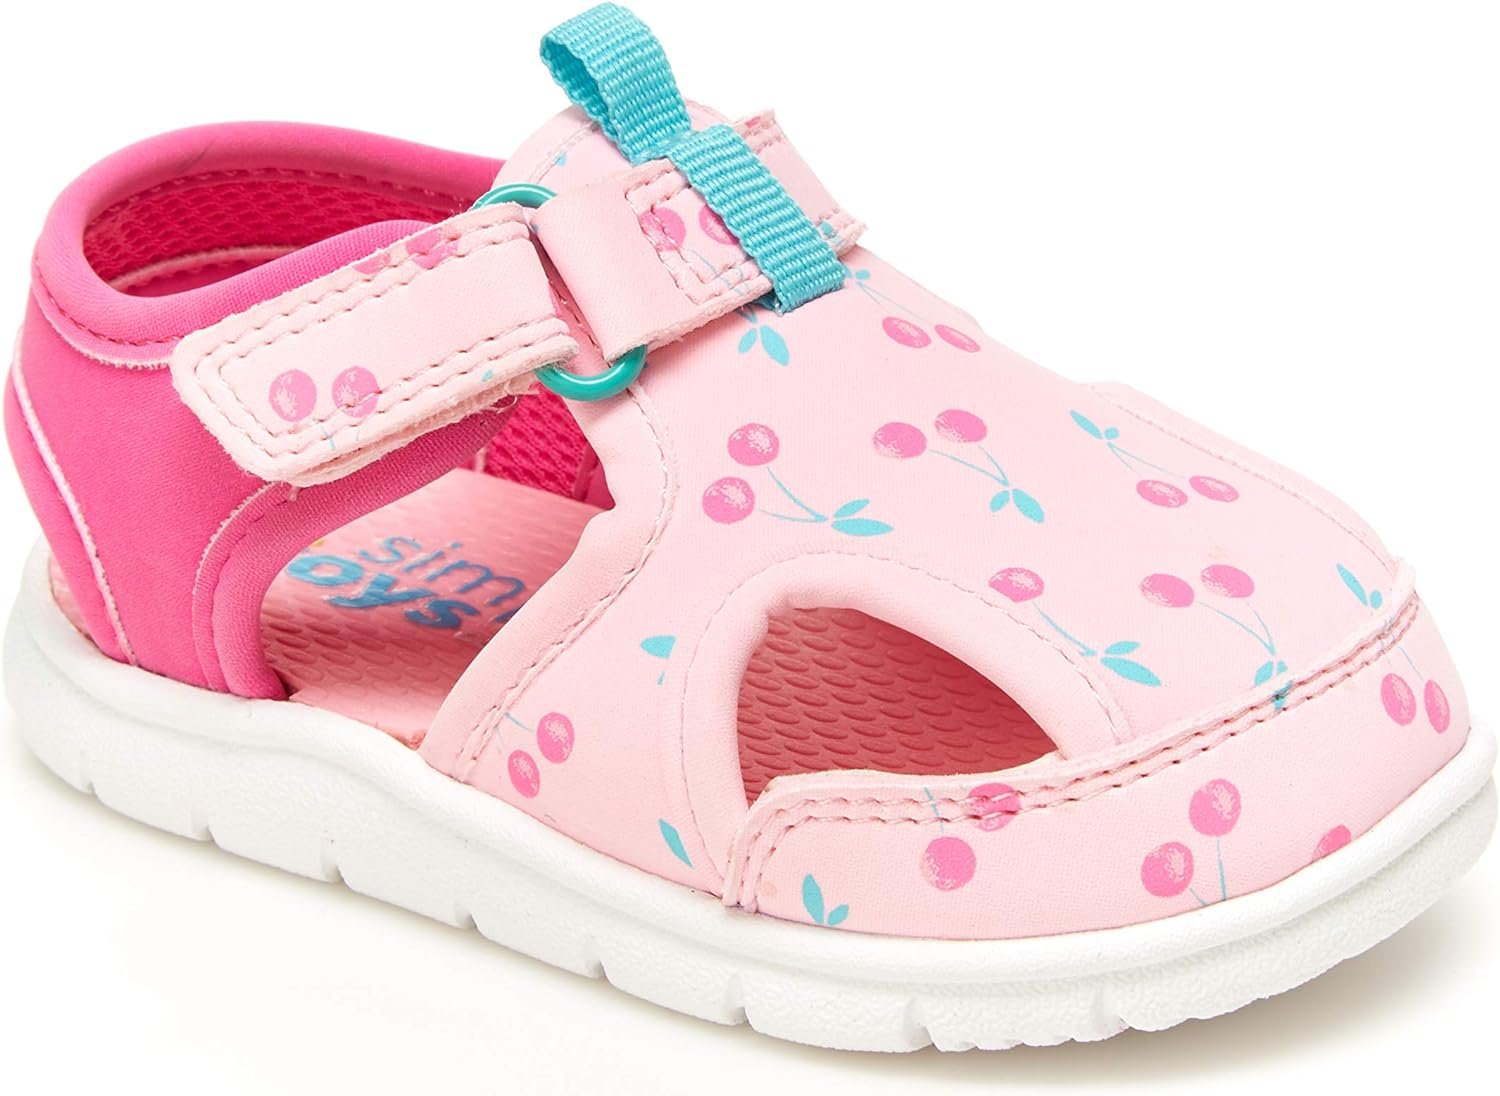 Simple Joys by Carters Girls Shawn Water Sandal